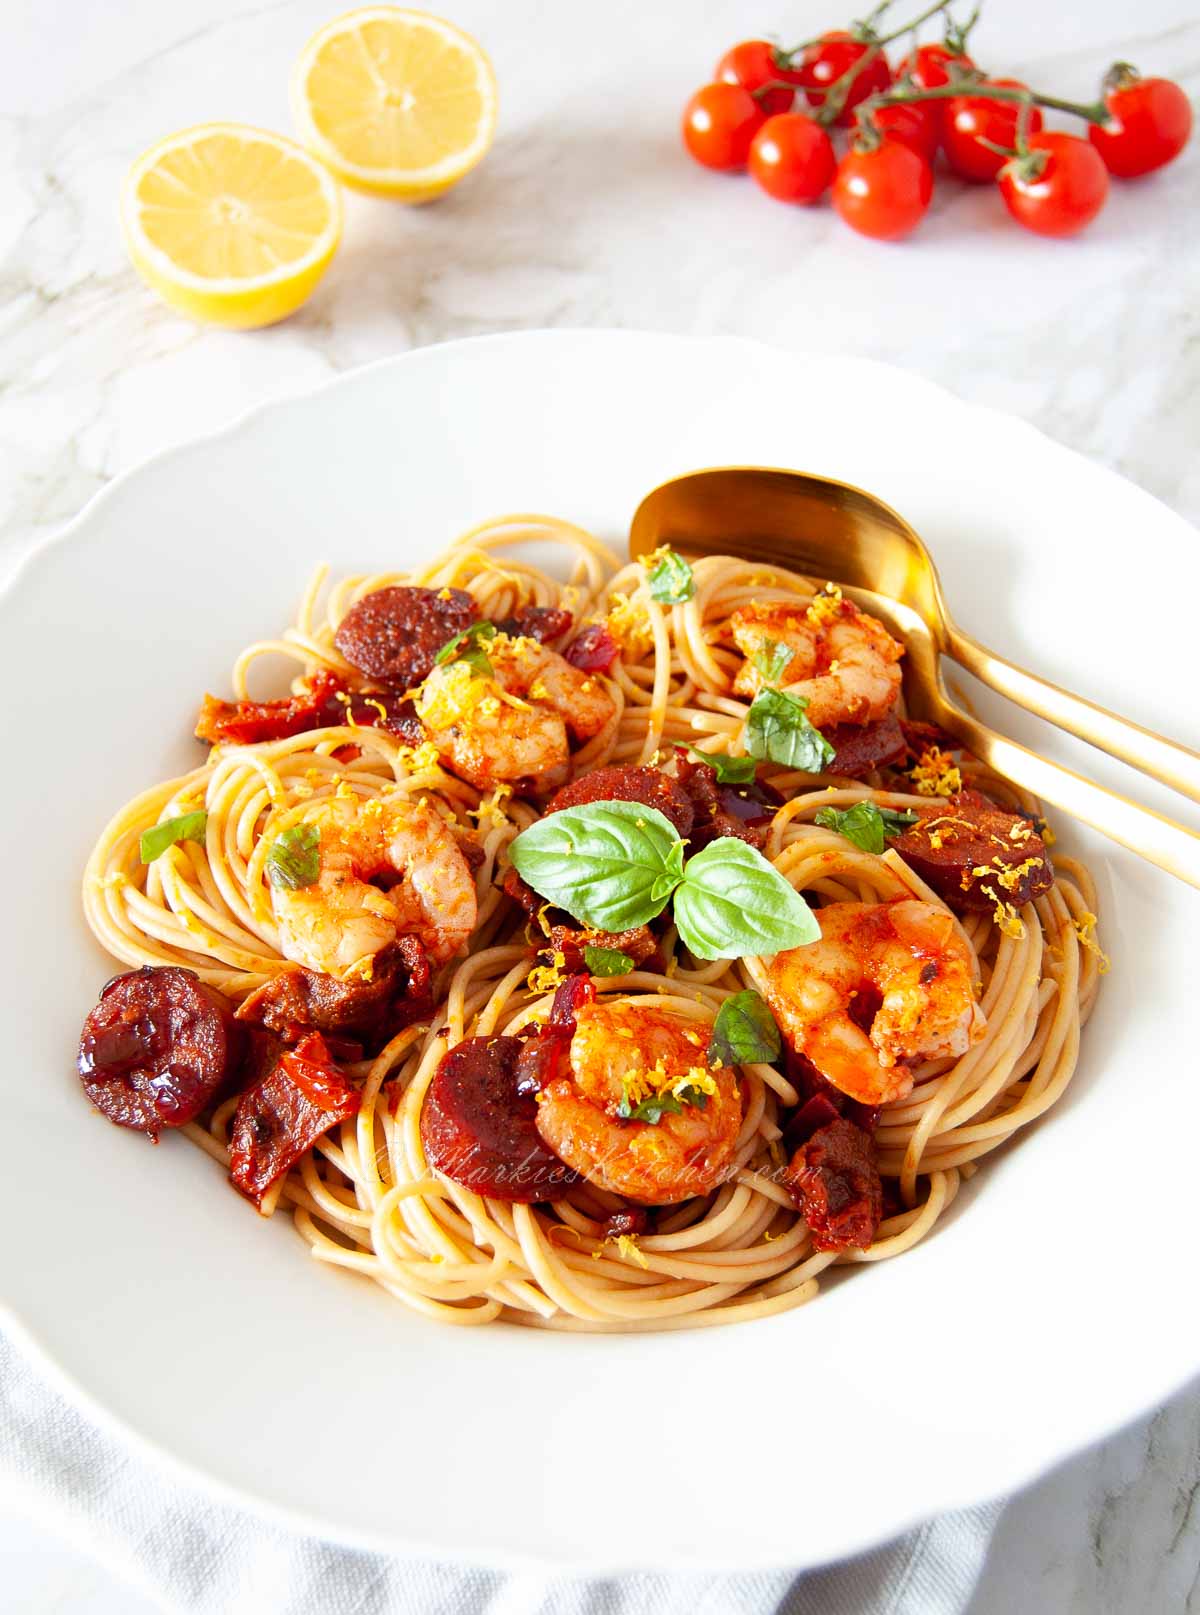 A bowl of spaghetti topped with chorizo, prawn, and basil on a table next to halved lemon and cherry tomatoes on the vine.